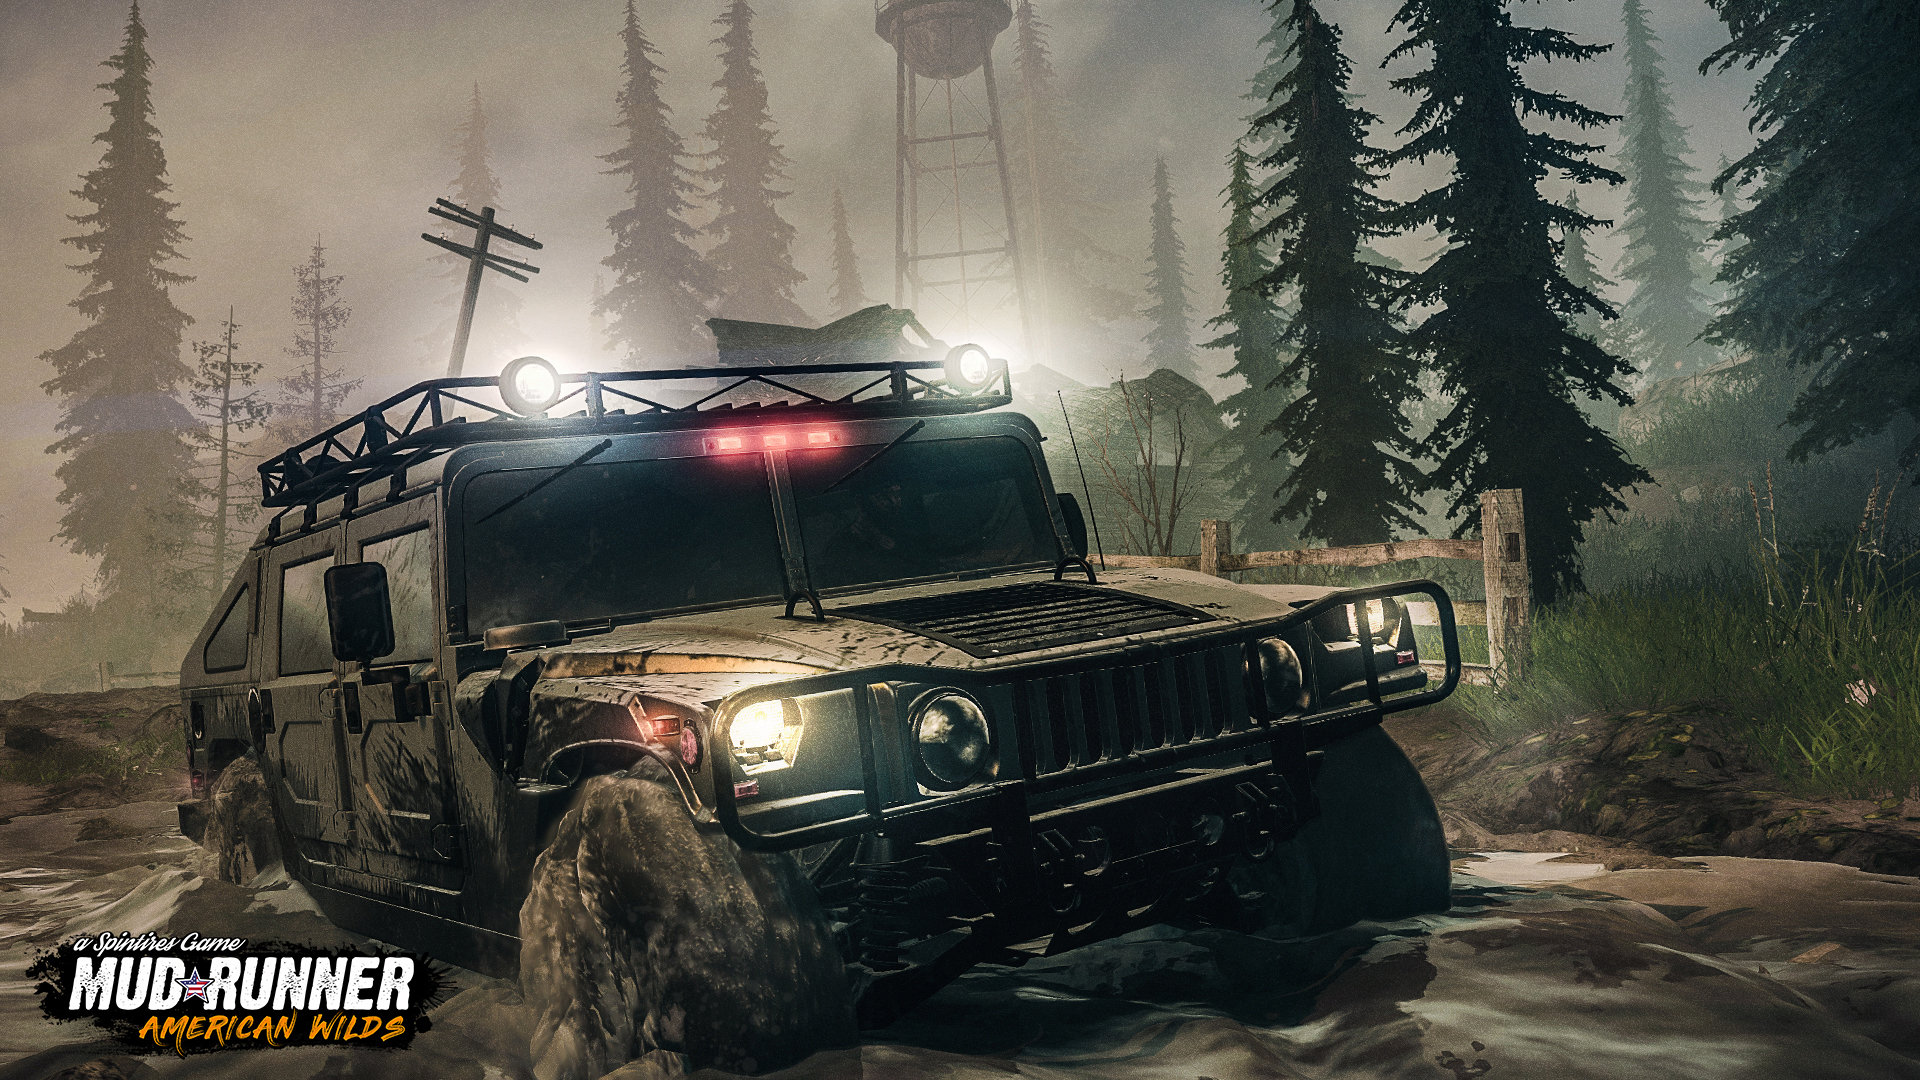 Expedition mudrunner nintendo. Игра Spin Tires MUDRUNNER. SPINTIRES Mud Runner. SPINTIRES: MUDRUNNER - American Wilds. MUDRUNNER American Wilds Edition.